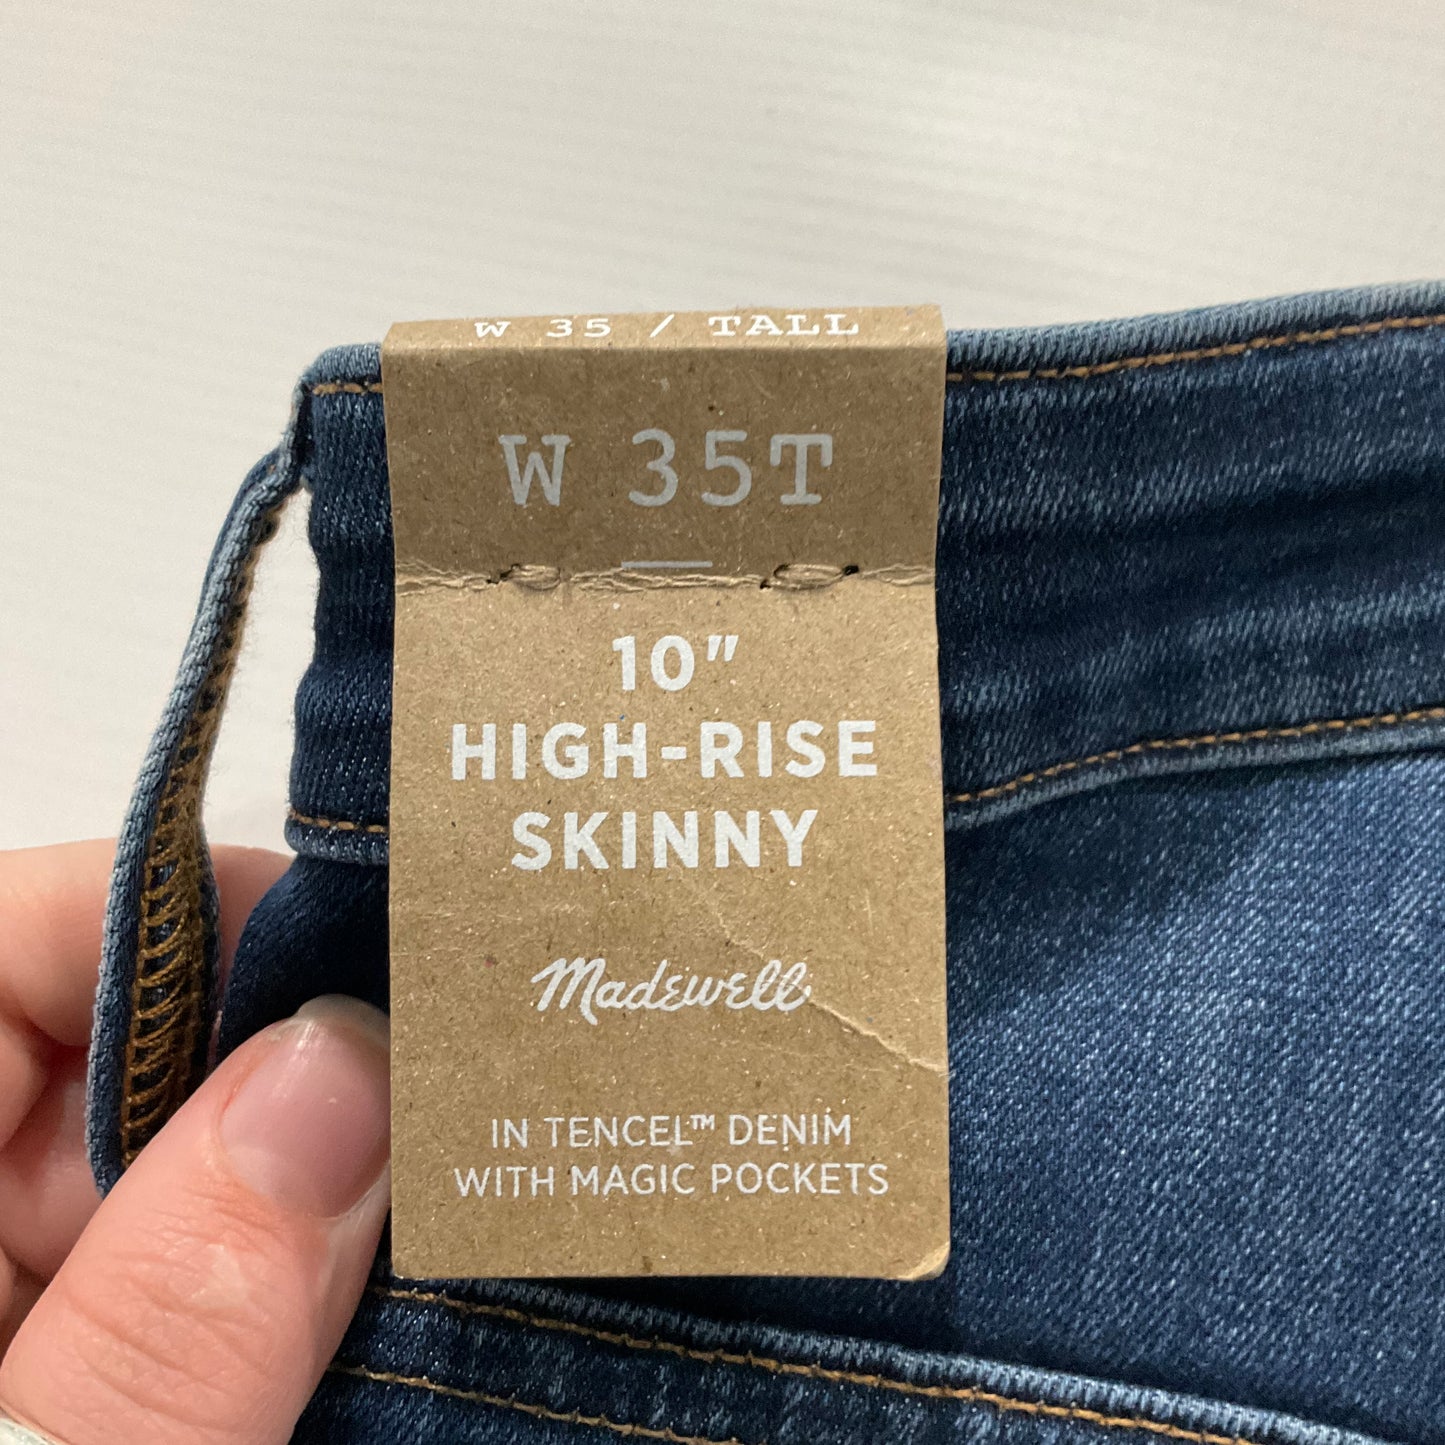 Jeans Skinny By Madewell  Size: 18